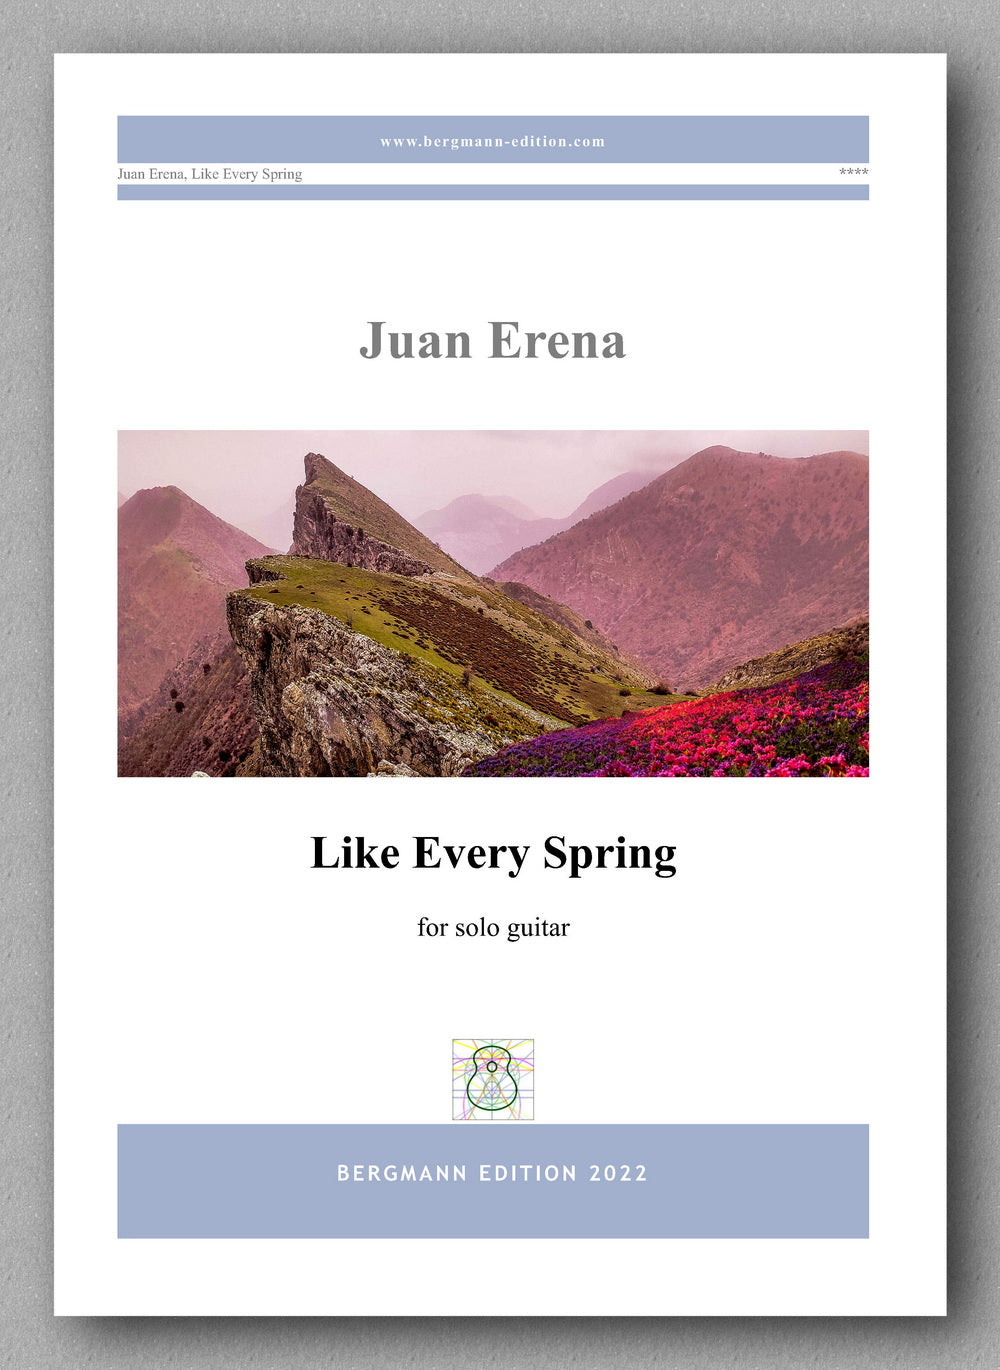 Juan Erena, Like Every Spring - preview of the cover